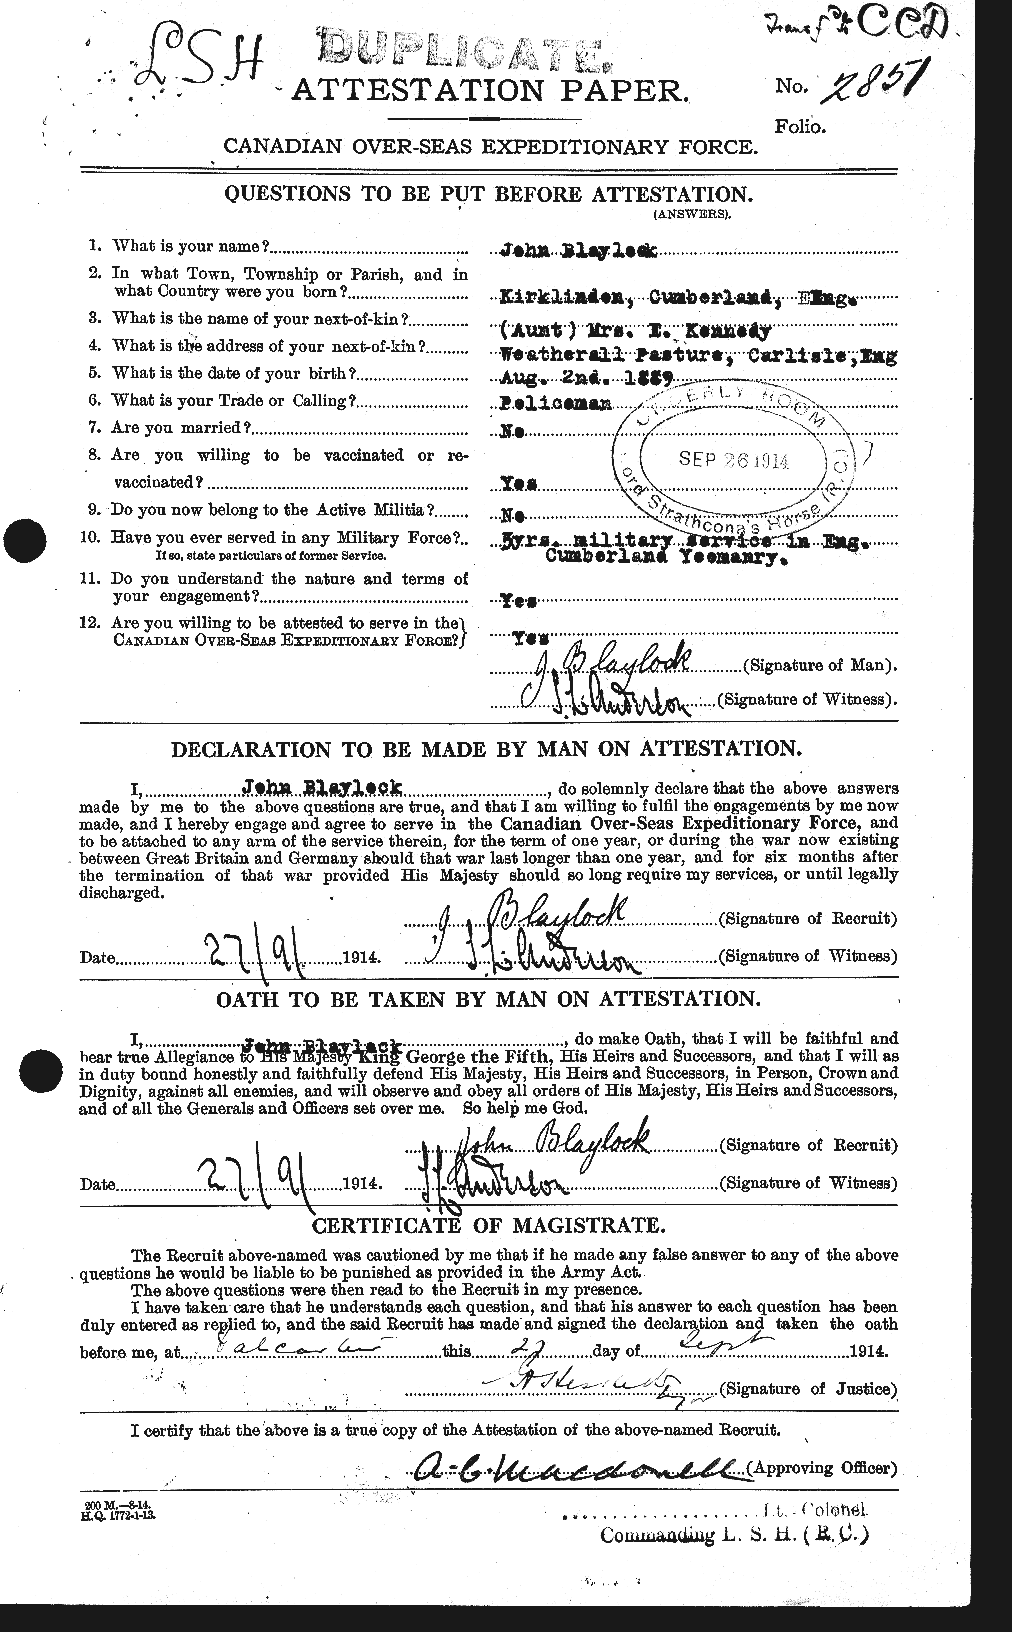 Personnel Records of the First World War - CEF 247854a